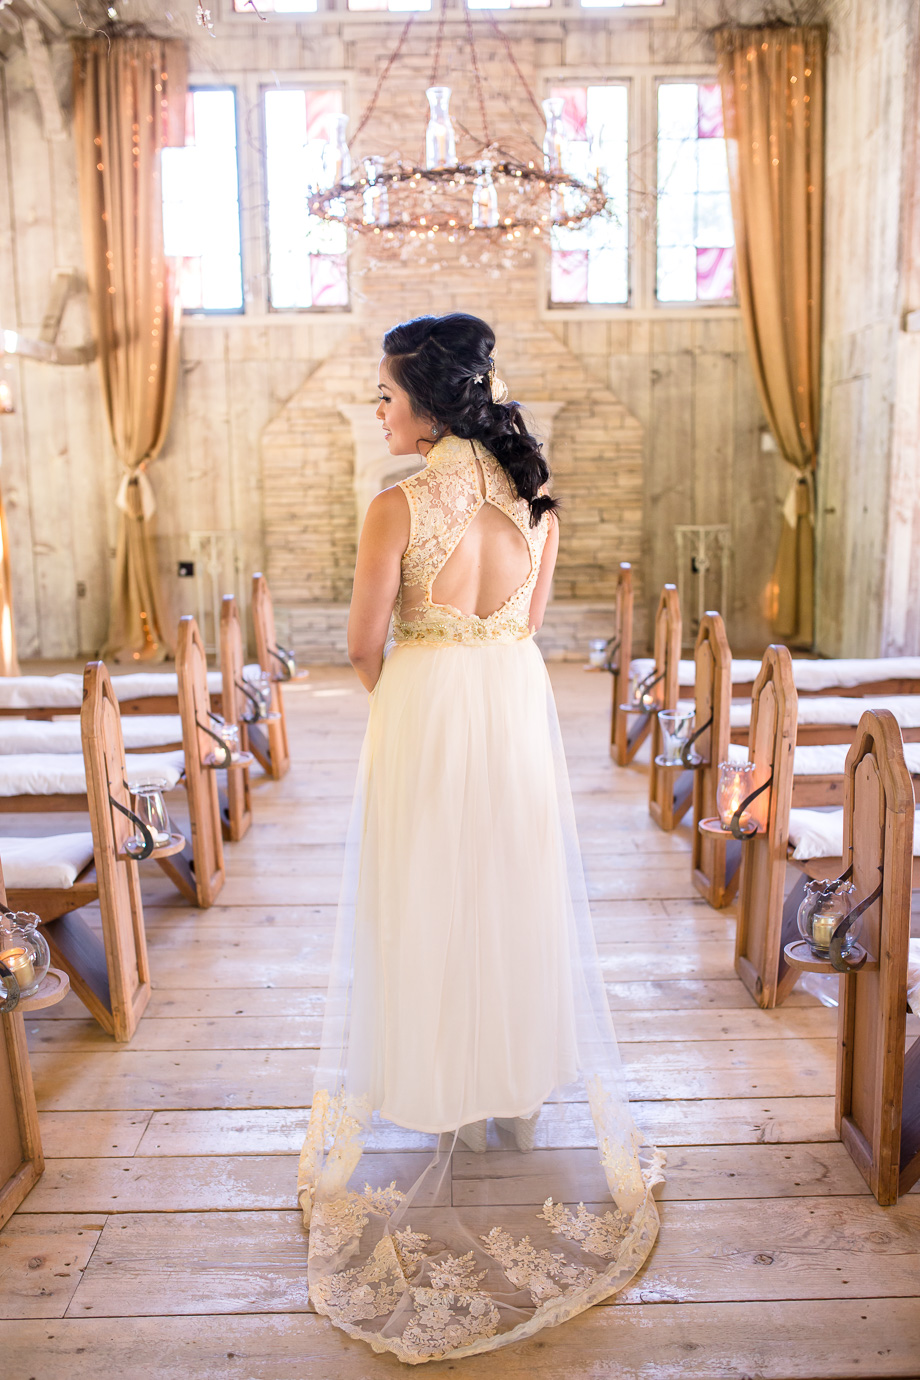 wedding at Union Hill Inn chapel - beautiful wedding dress with a lace train with Vietnamese gold accents, designed by bride herself